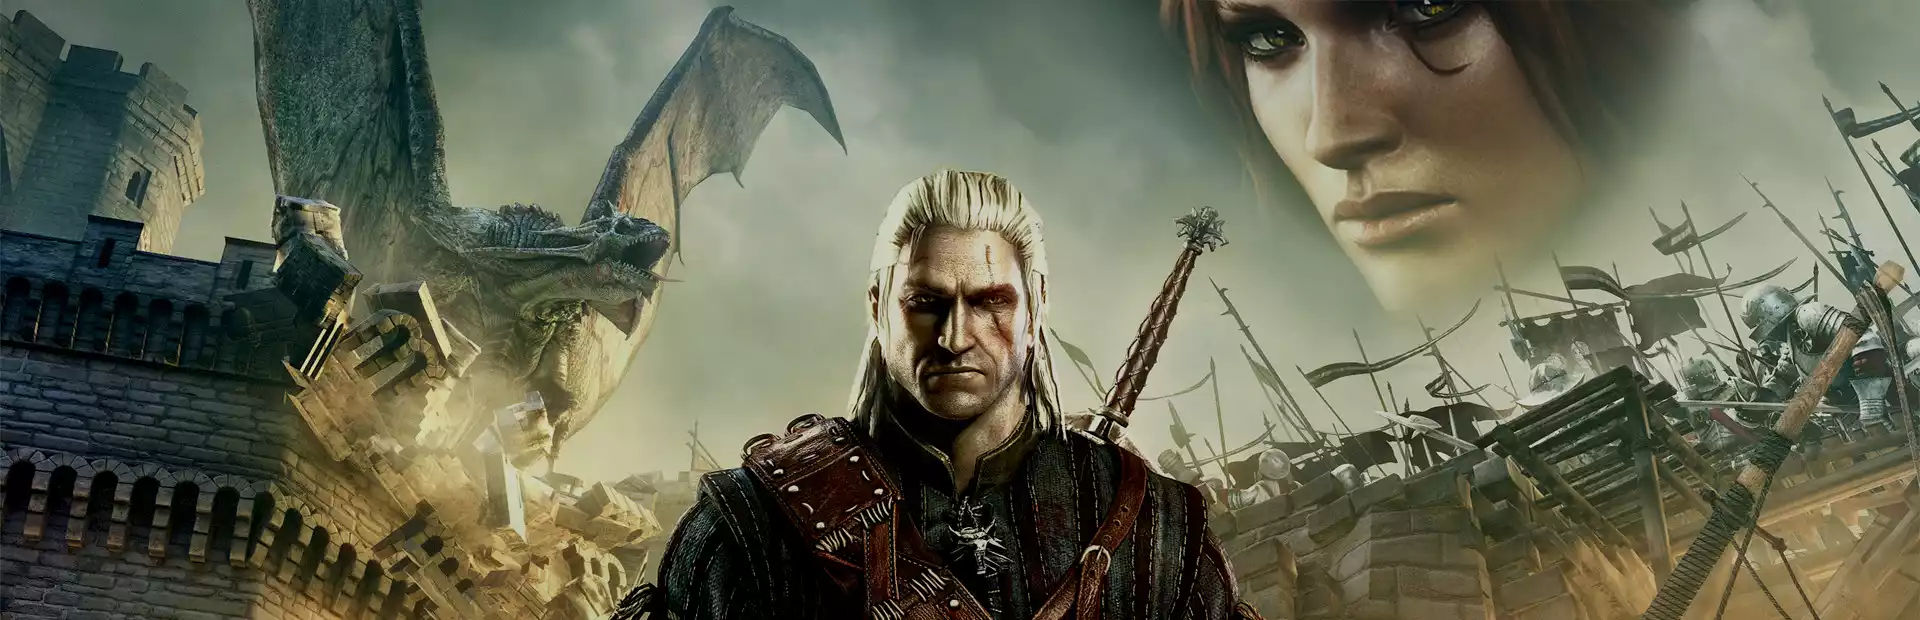 The Witcher 2: Assassins of Kings Enhanced Edition GOG Key GLOBAL